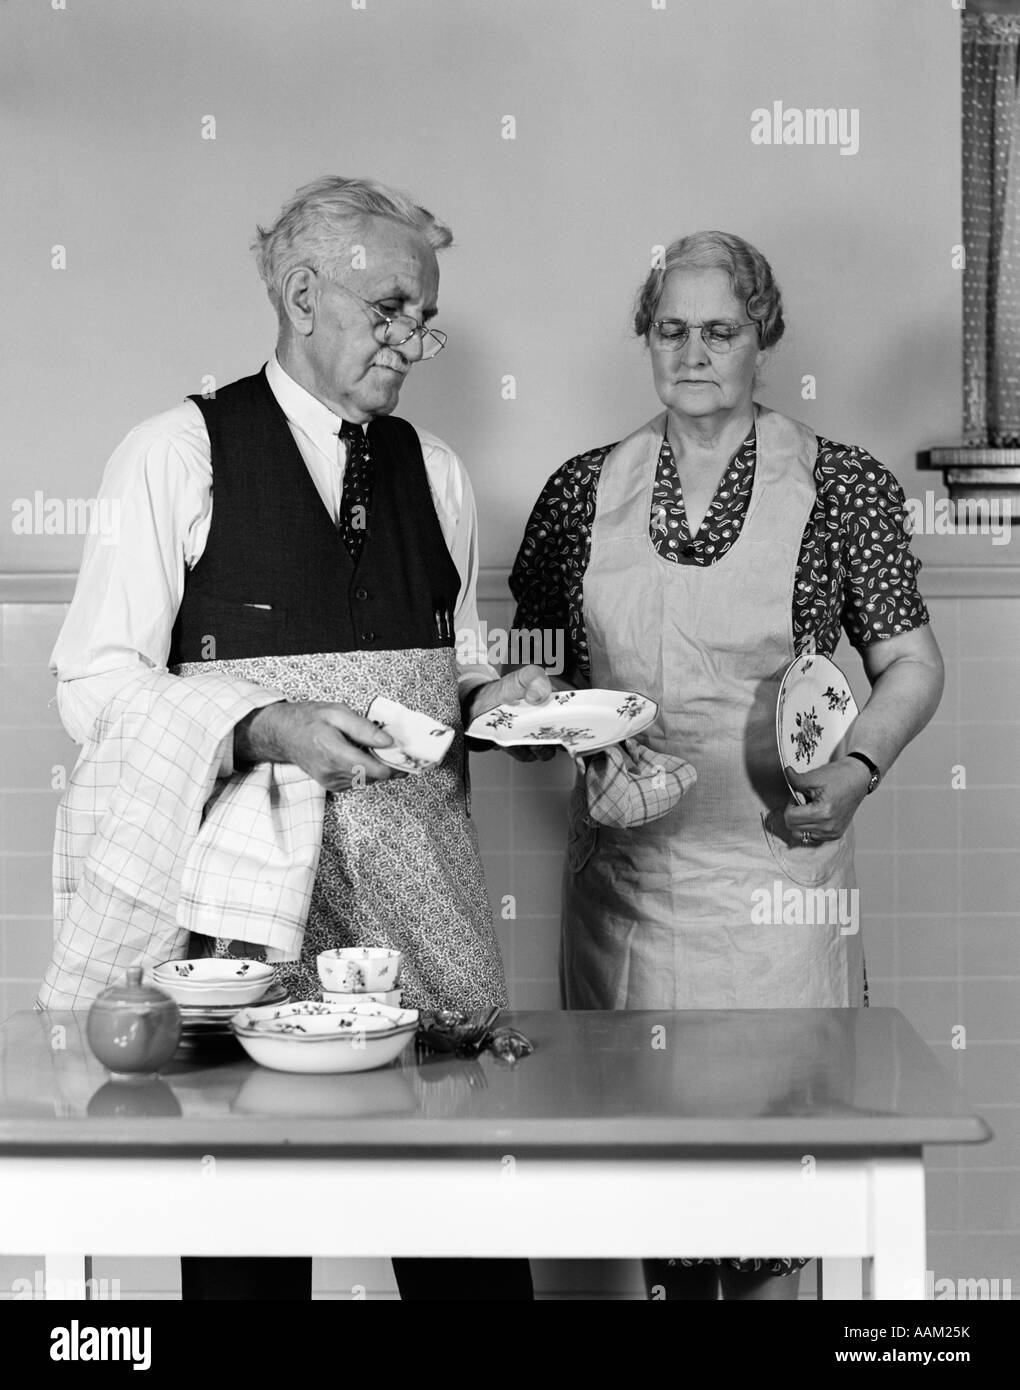 1940s 1950s ELDERLY COUPLE MAN WOMAN IN KITCHEN AT TABLE HOLDING DISHES ...